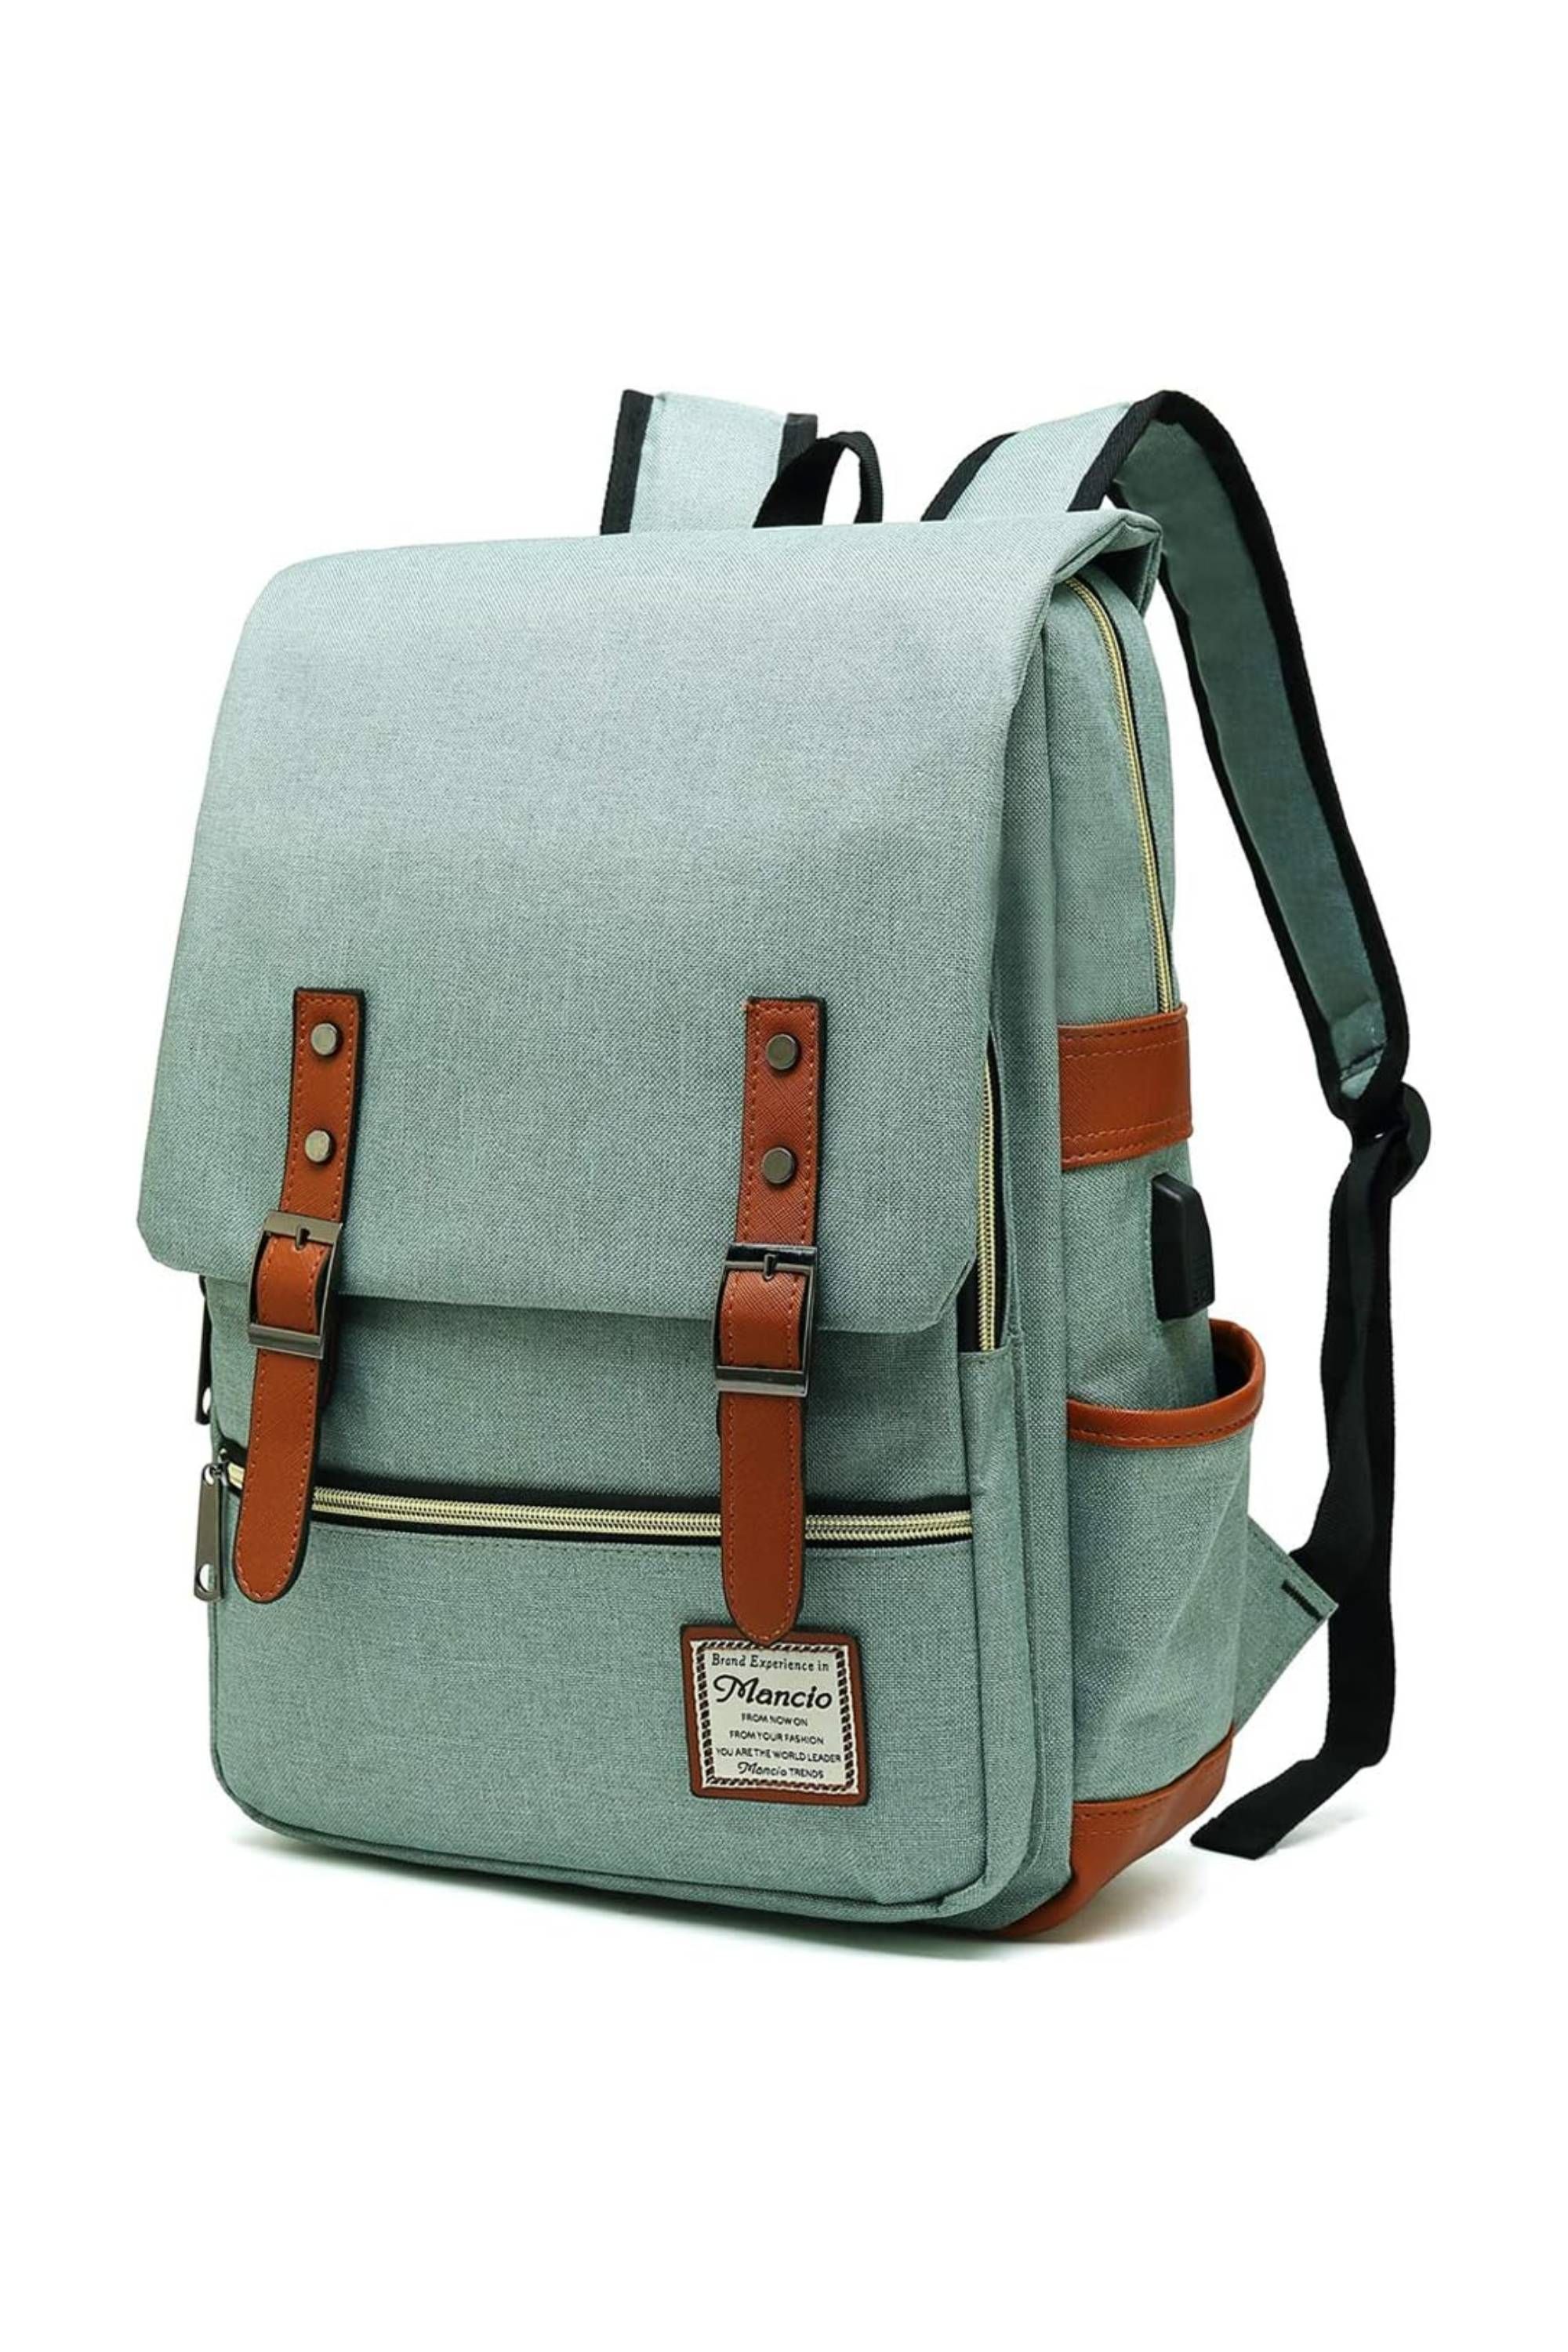 Mancio Vintage Laptop Business Backpack with USB Charging Port